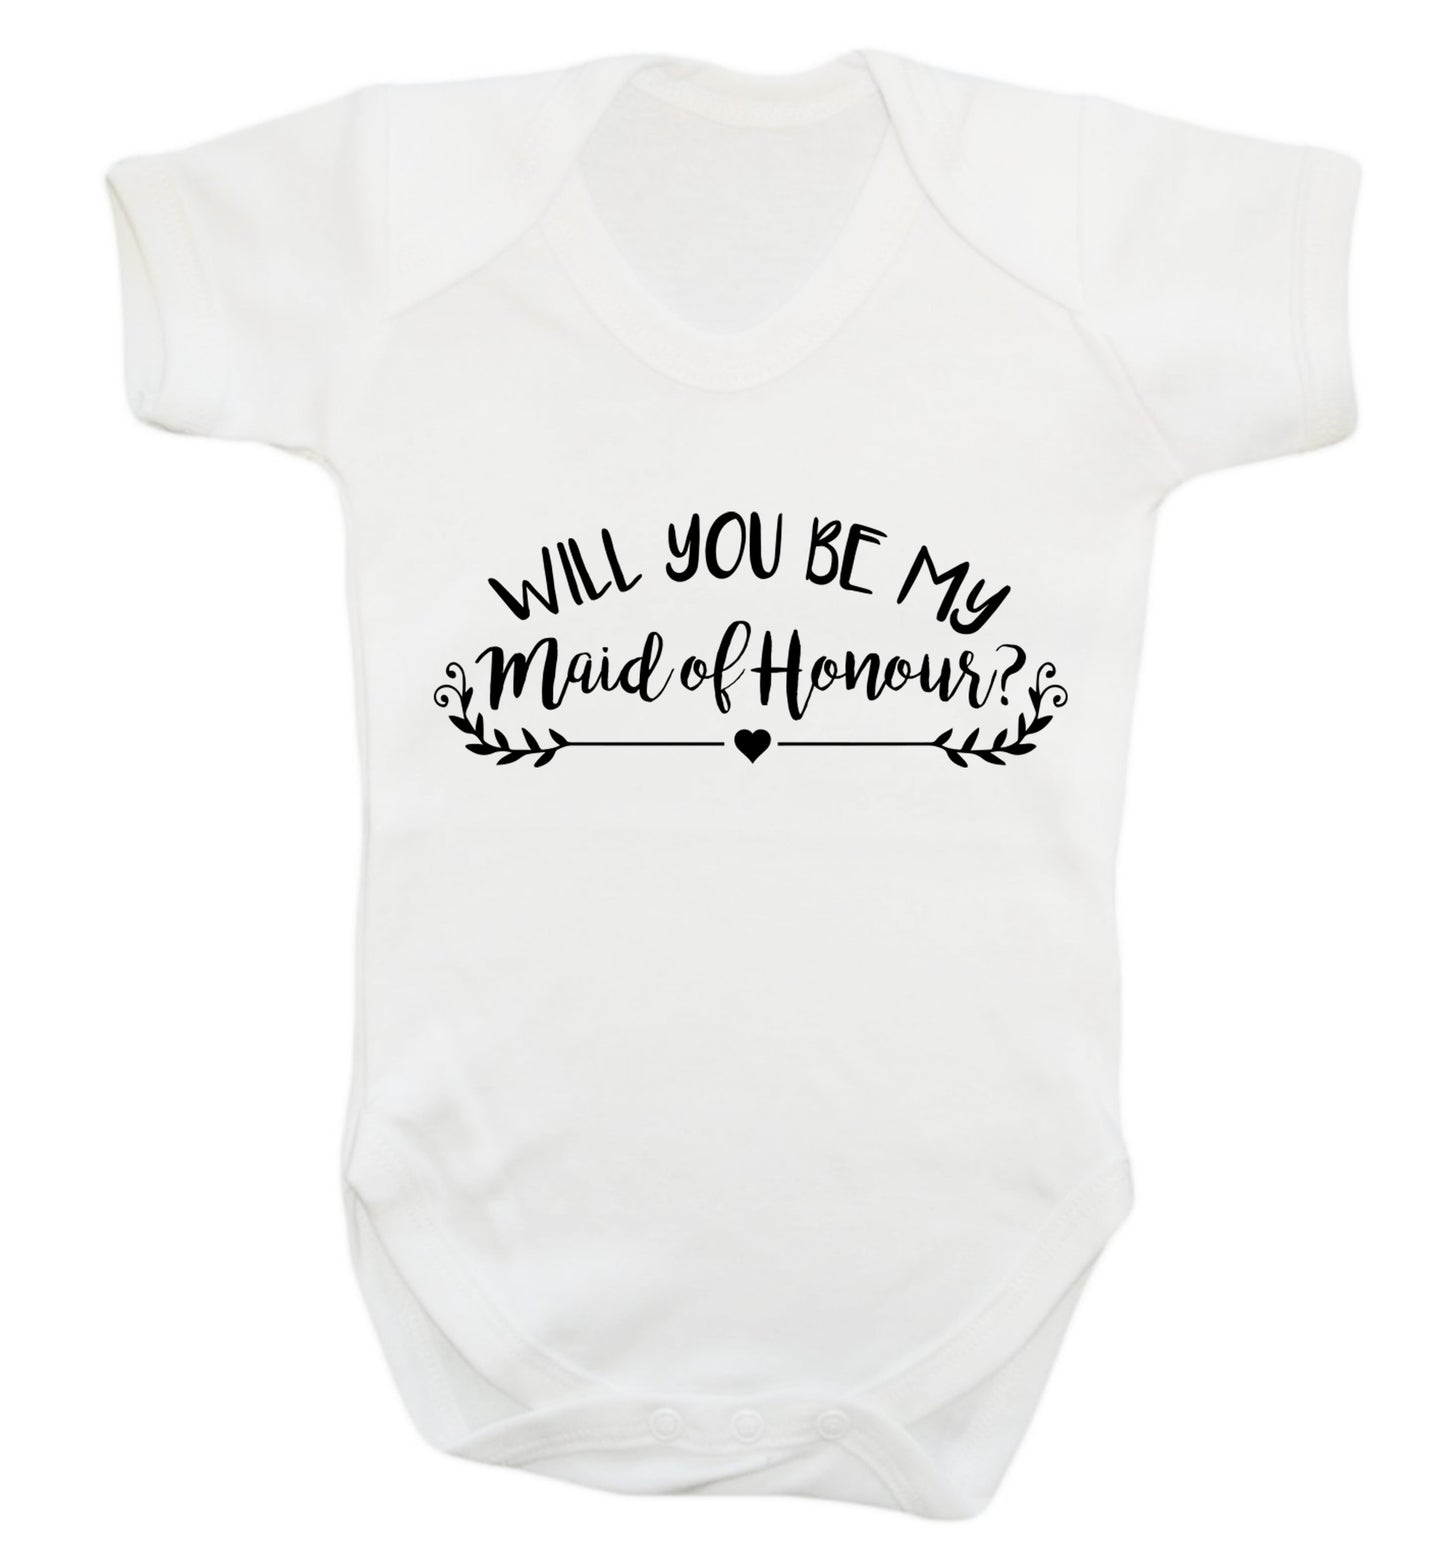 Will you be my maid of honour? Baby Vest white 18-24 months